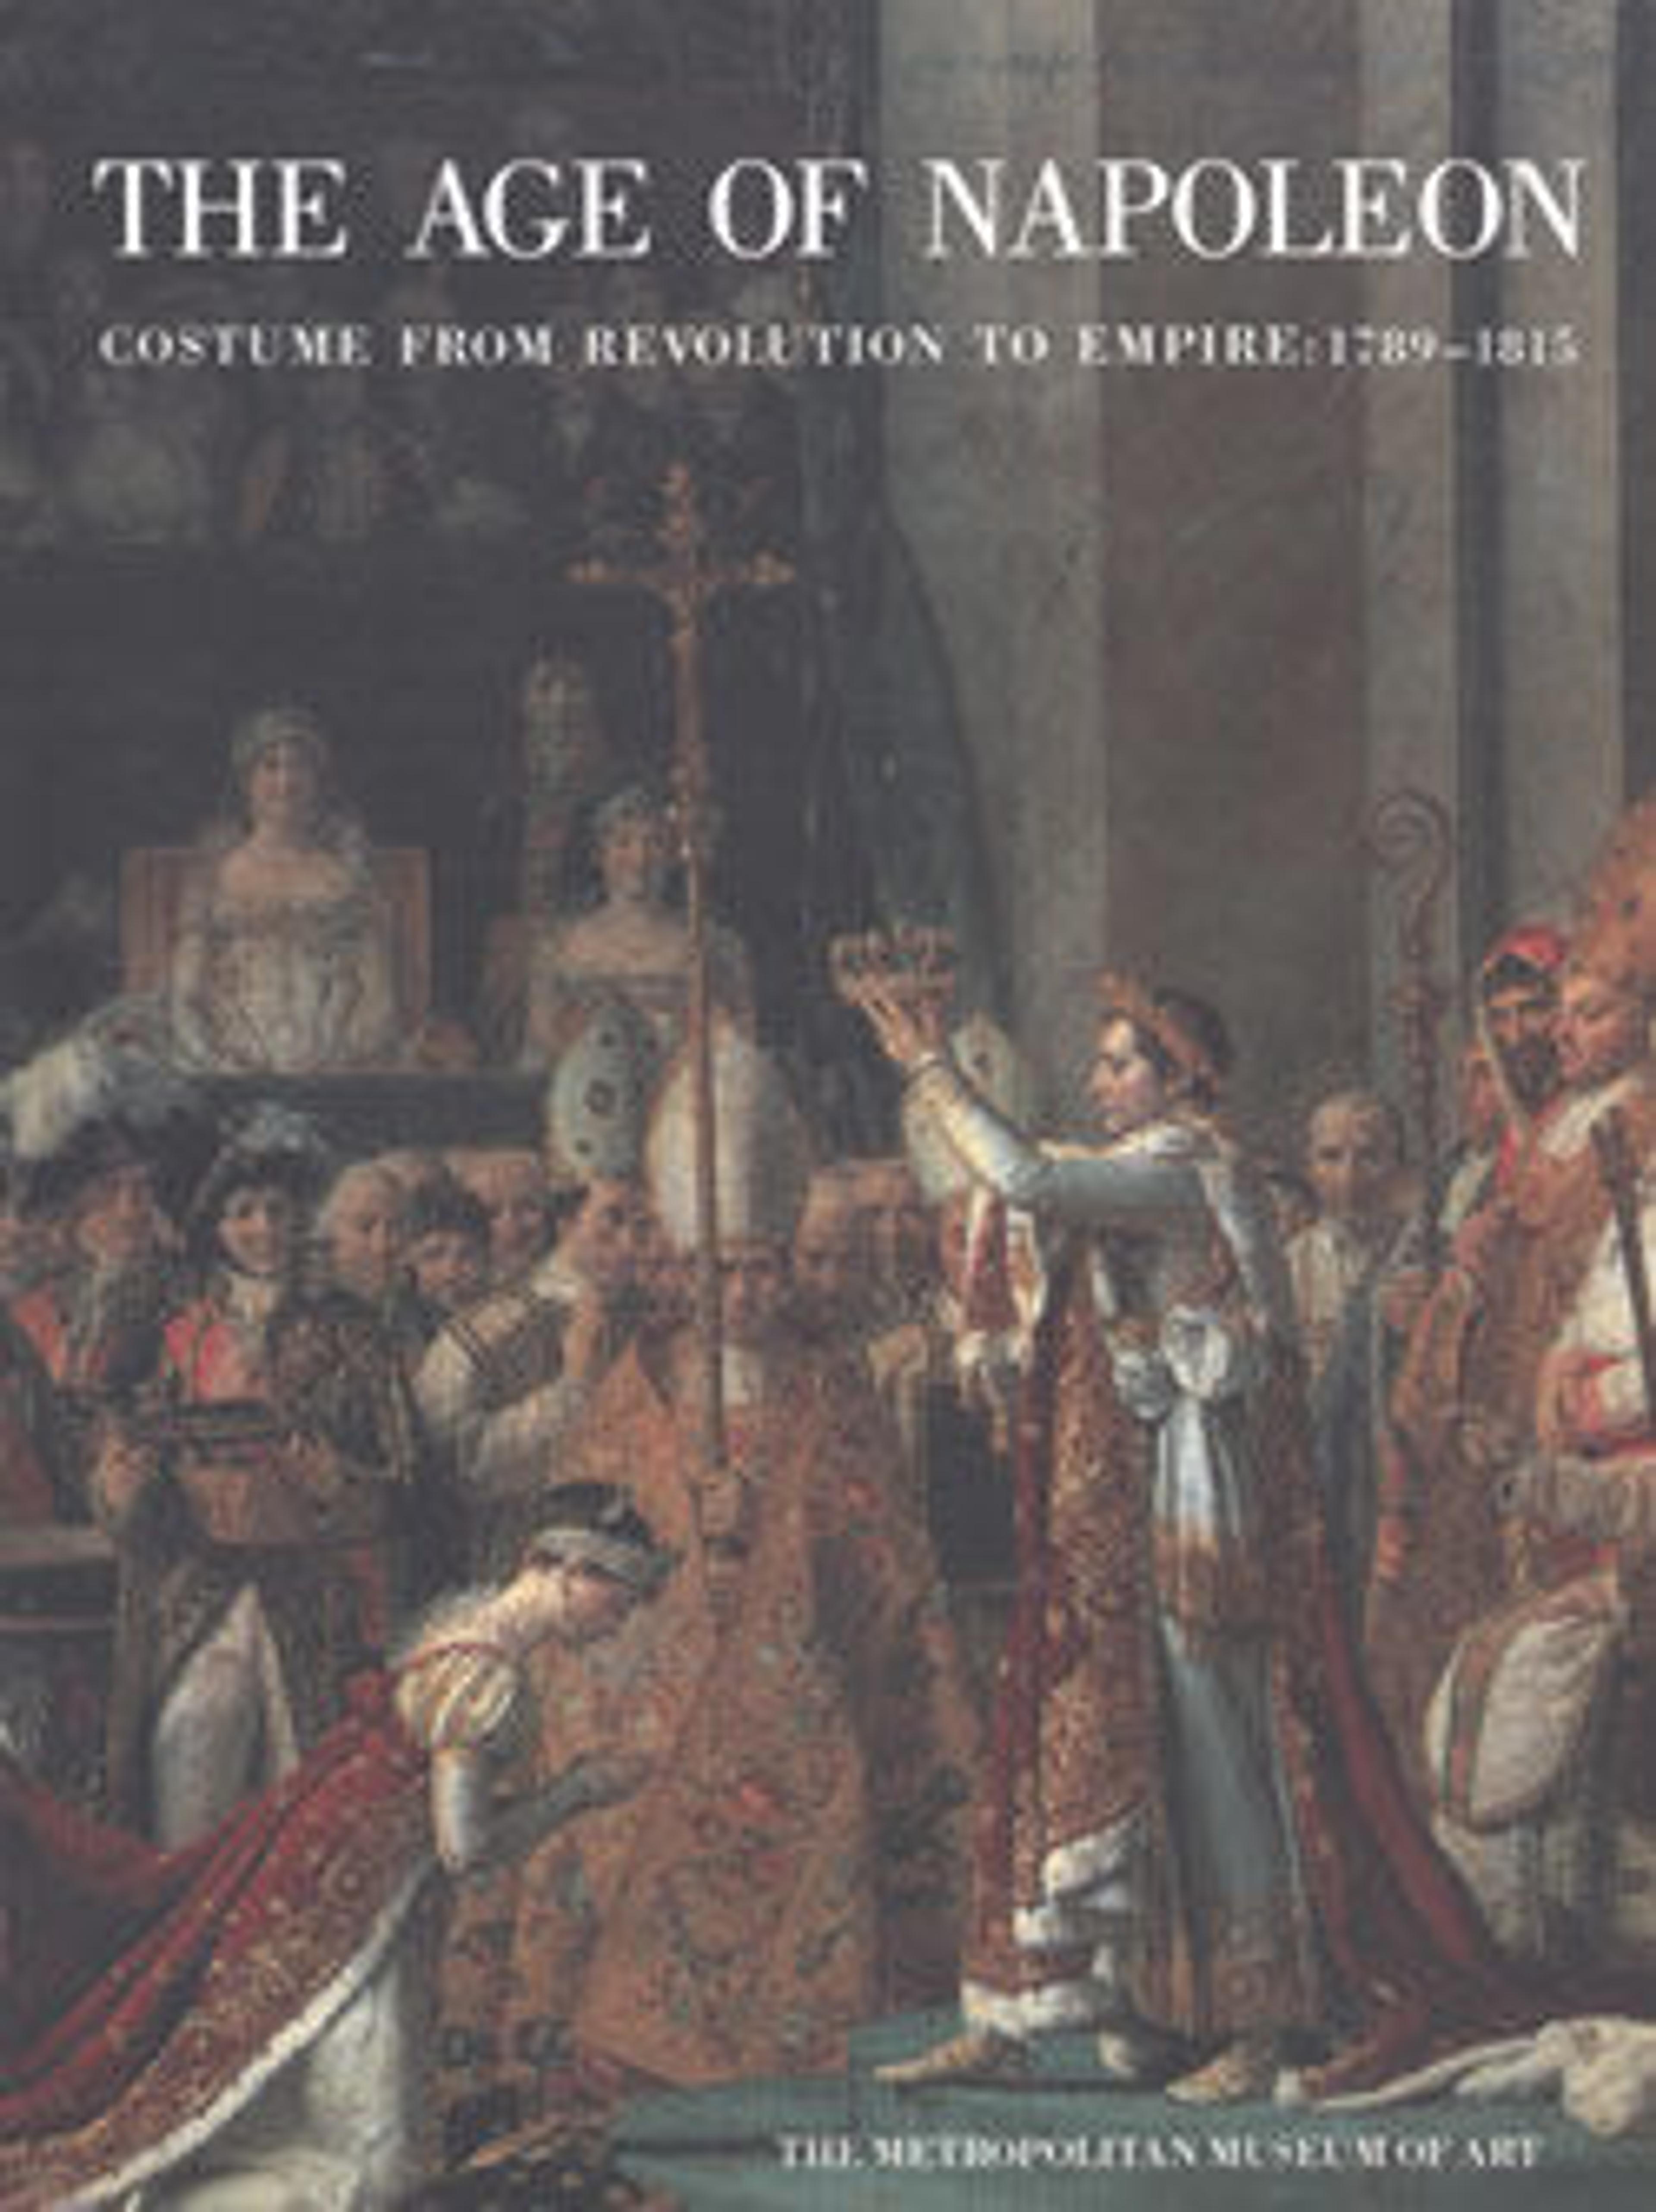 The Age of Napoleon: Costume from Revolution to Empire, 1789-1815